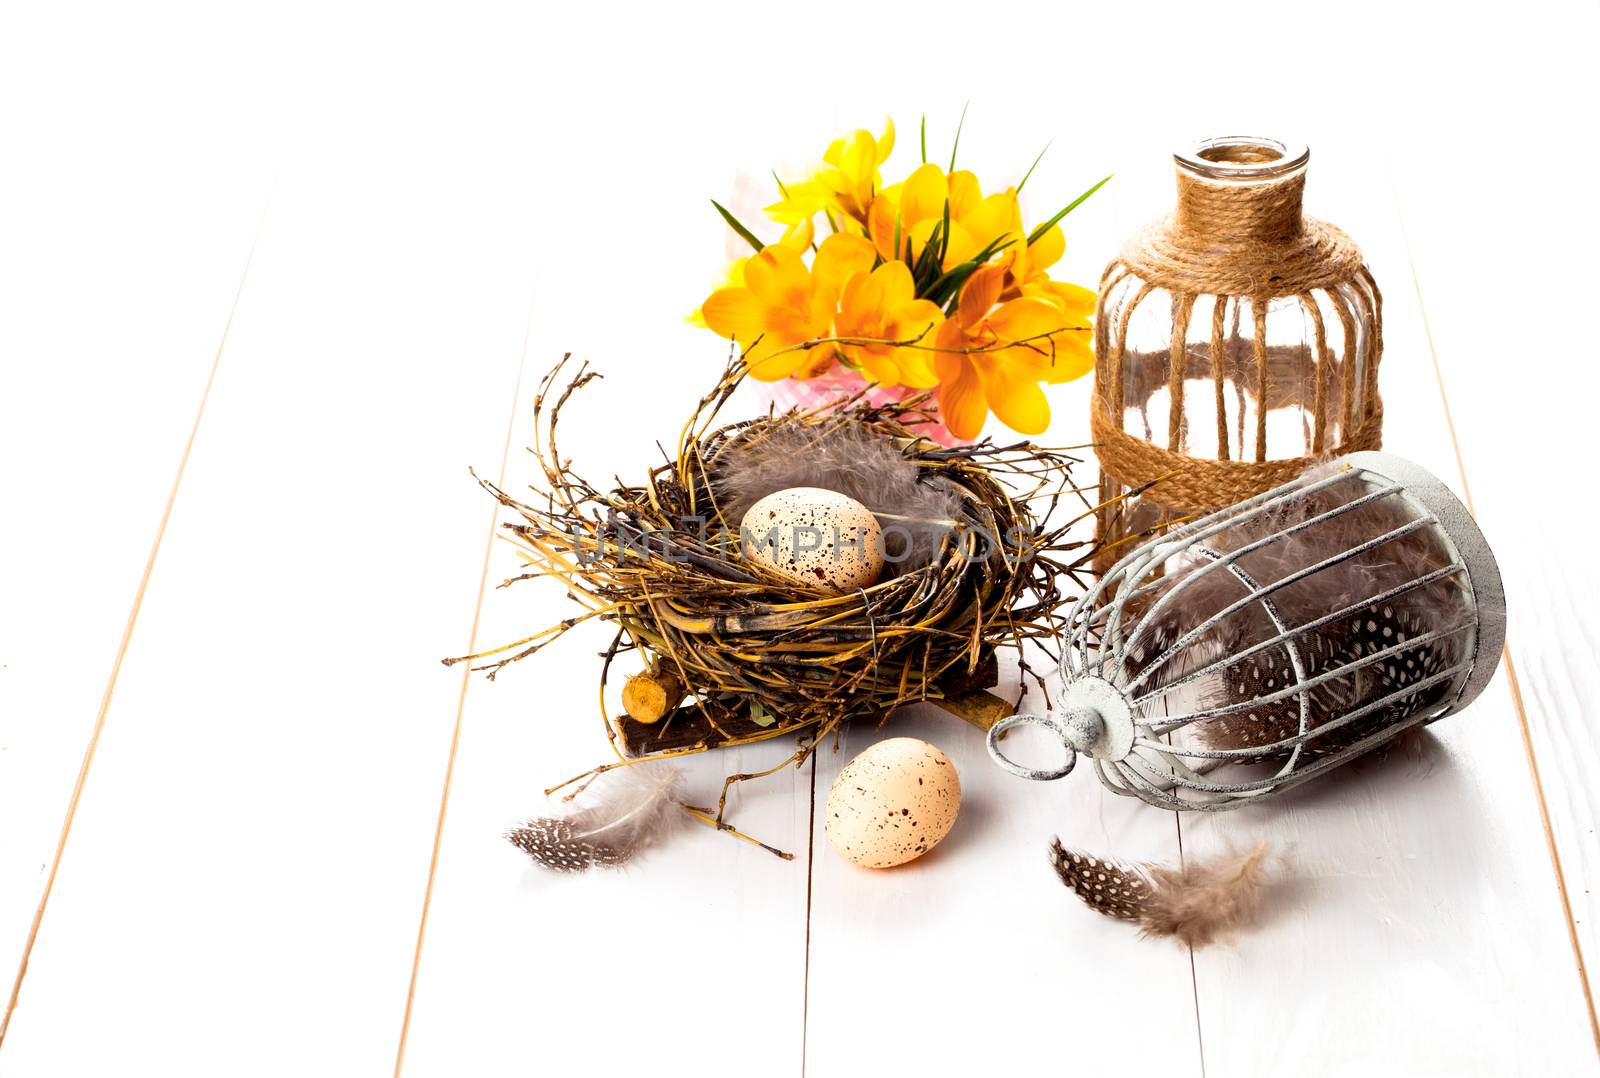 Easter eggs nest with birdcage and yellow Spring Crocus. on white wooden background